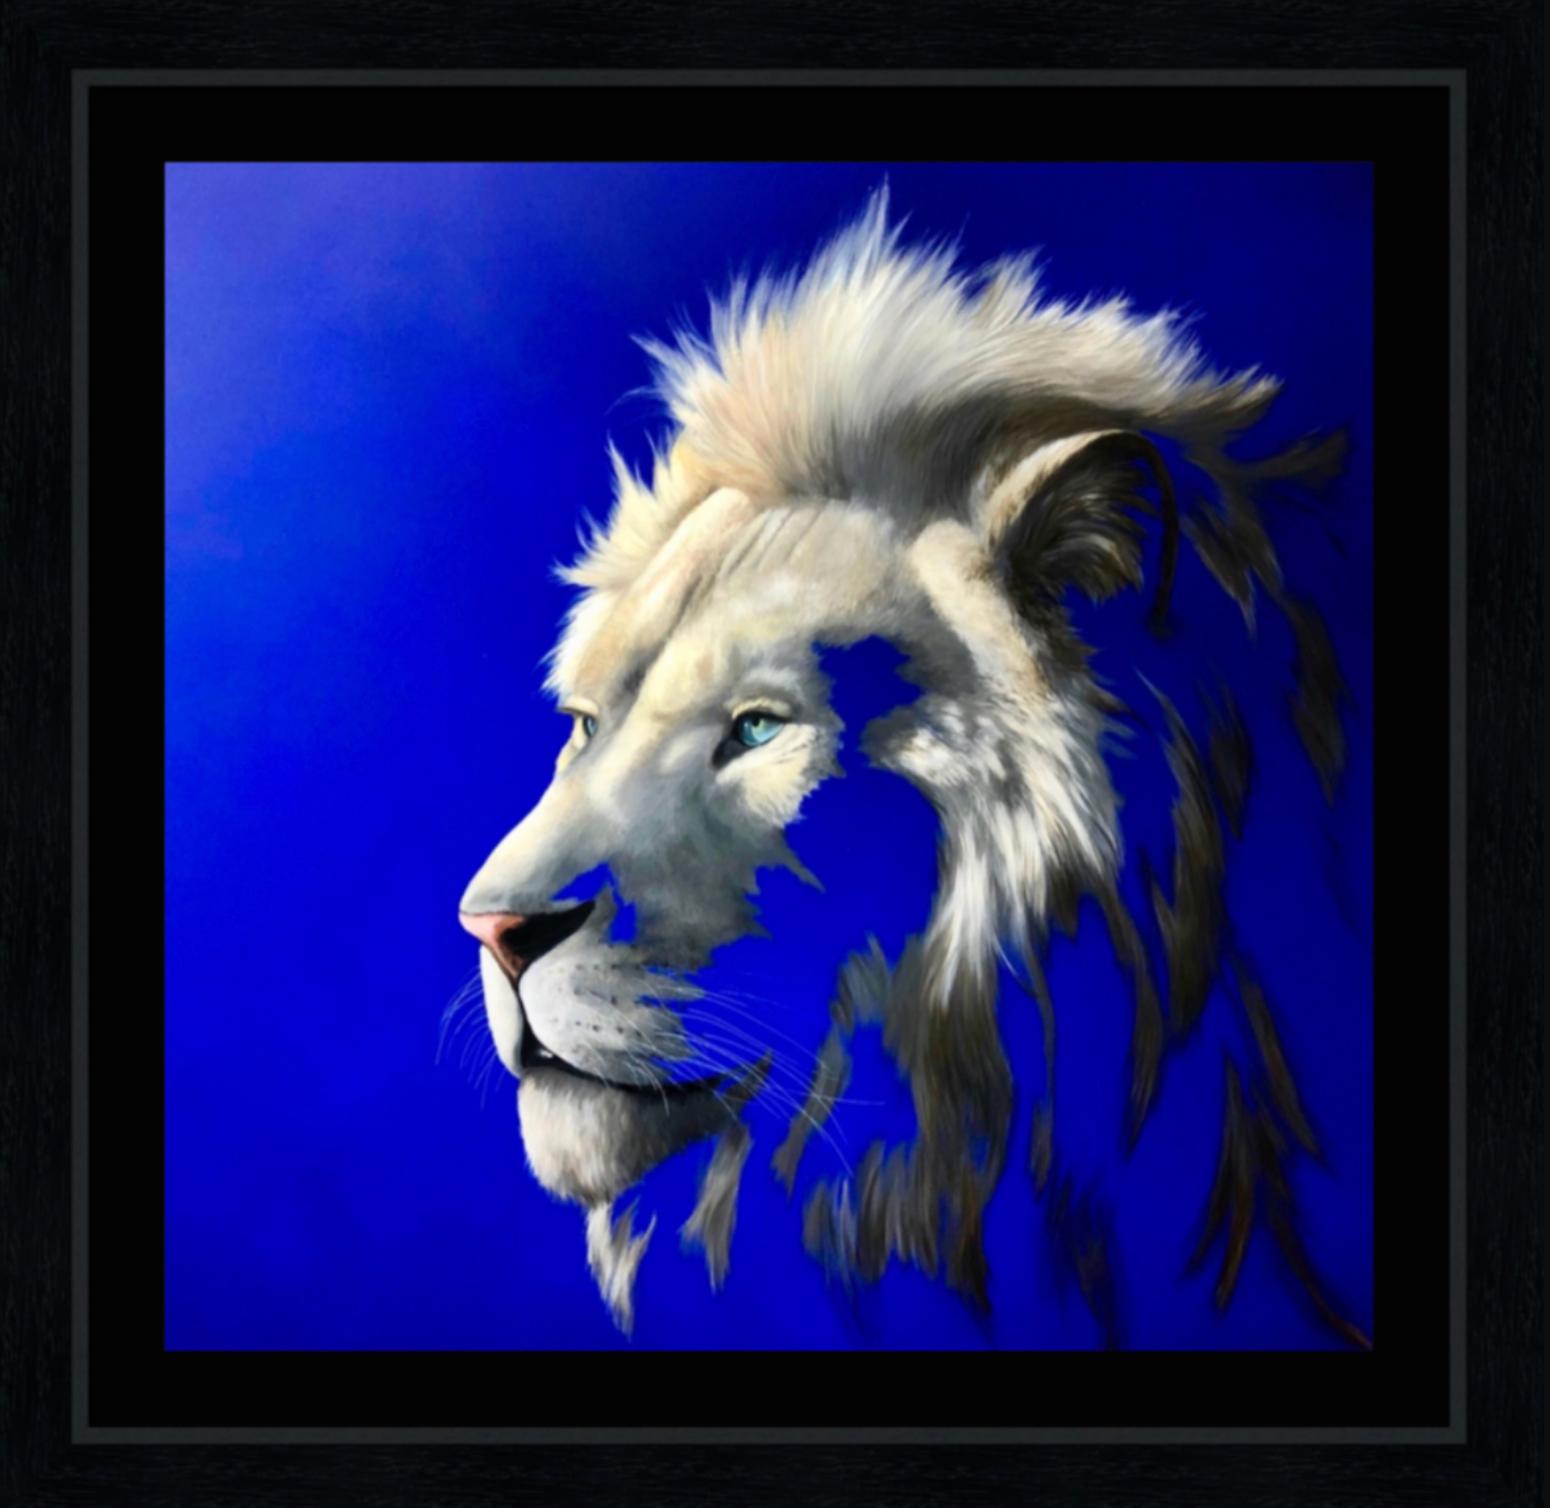 Limited edition Giclee print of a lion that was handpainted by the artist on Somerset Velvet 330gsm Paper 100x100cm, Edition of 20.

This piece depicts the iconic African Lion in all his glory. Sadly a species that is now under threat, this lion is